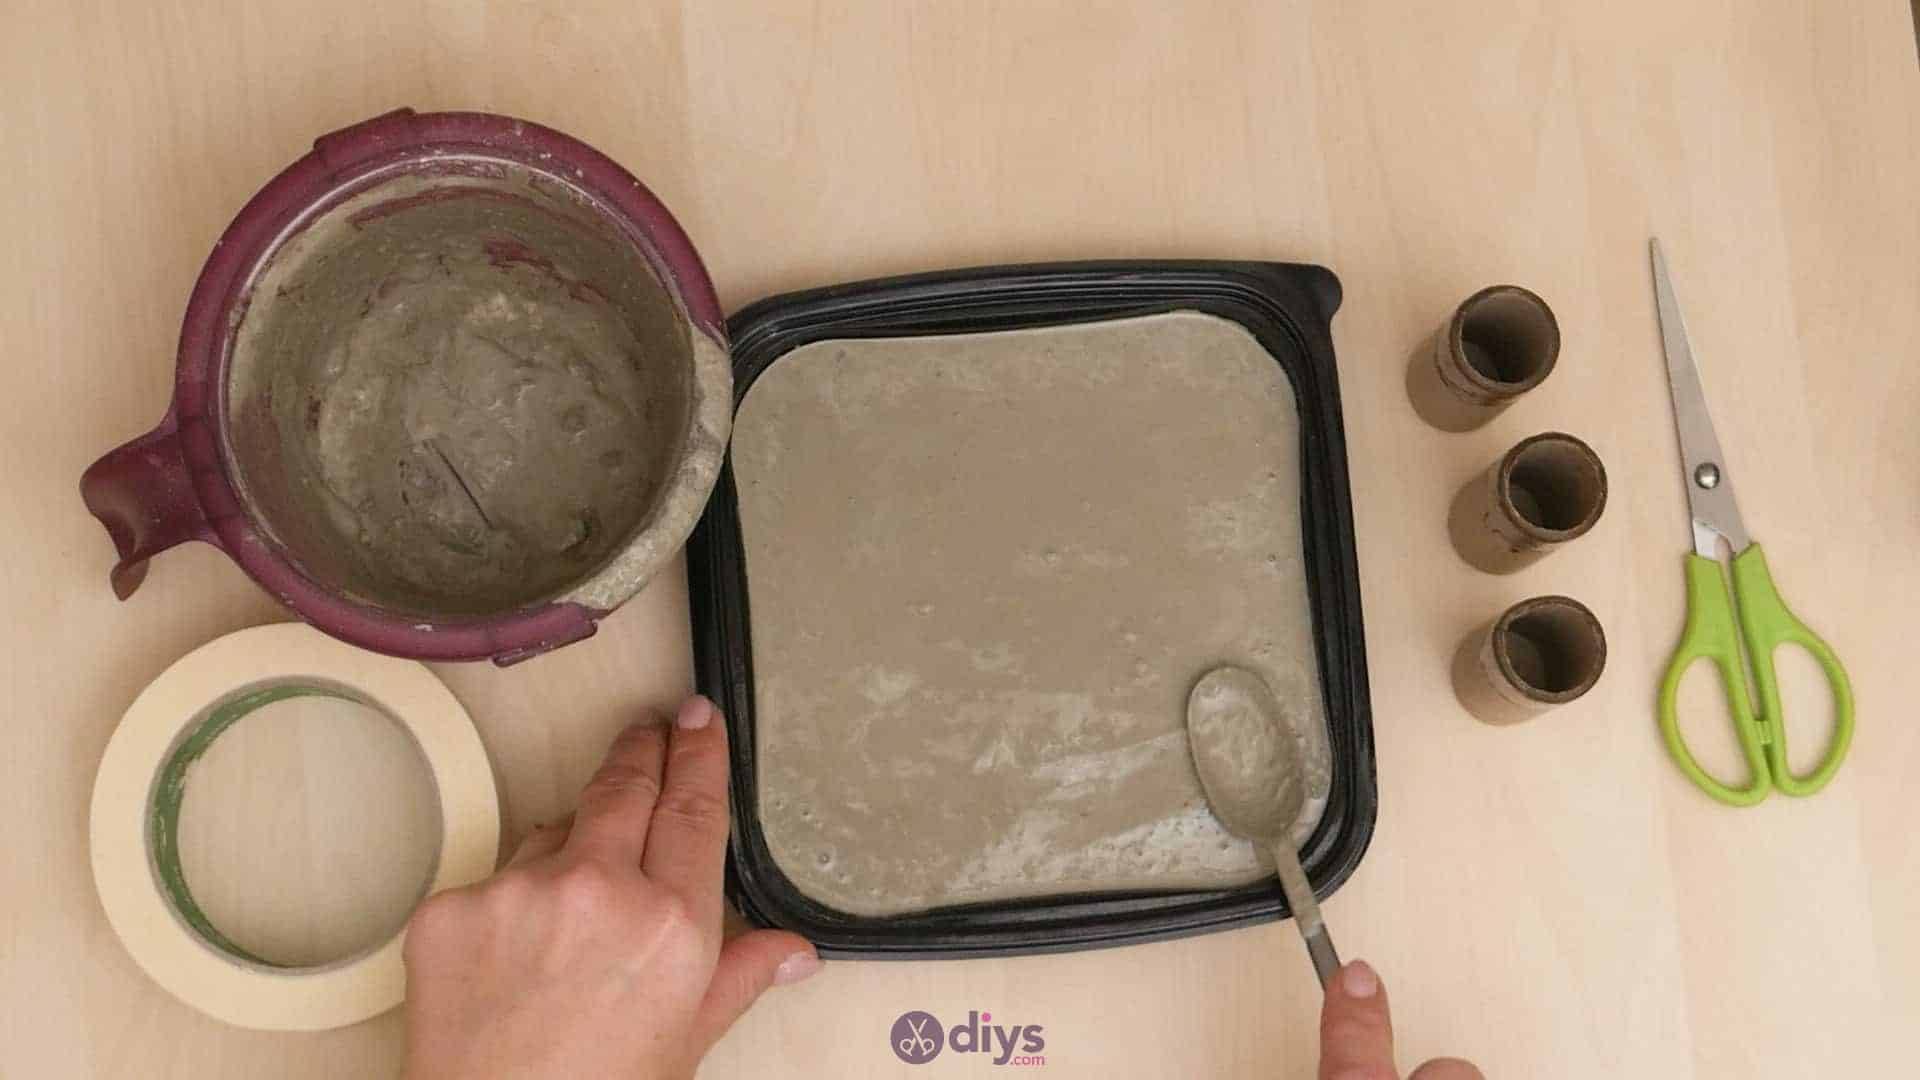 Diy concrete candle holder plate step 4c